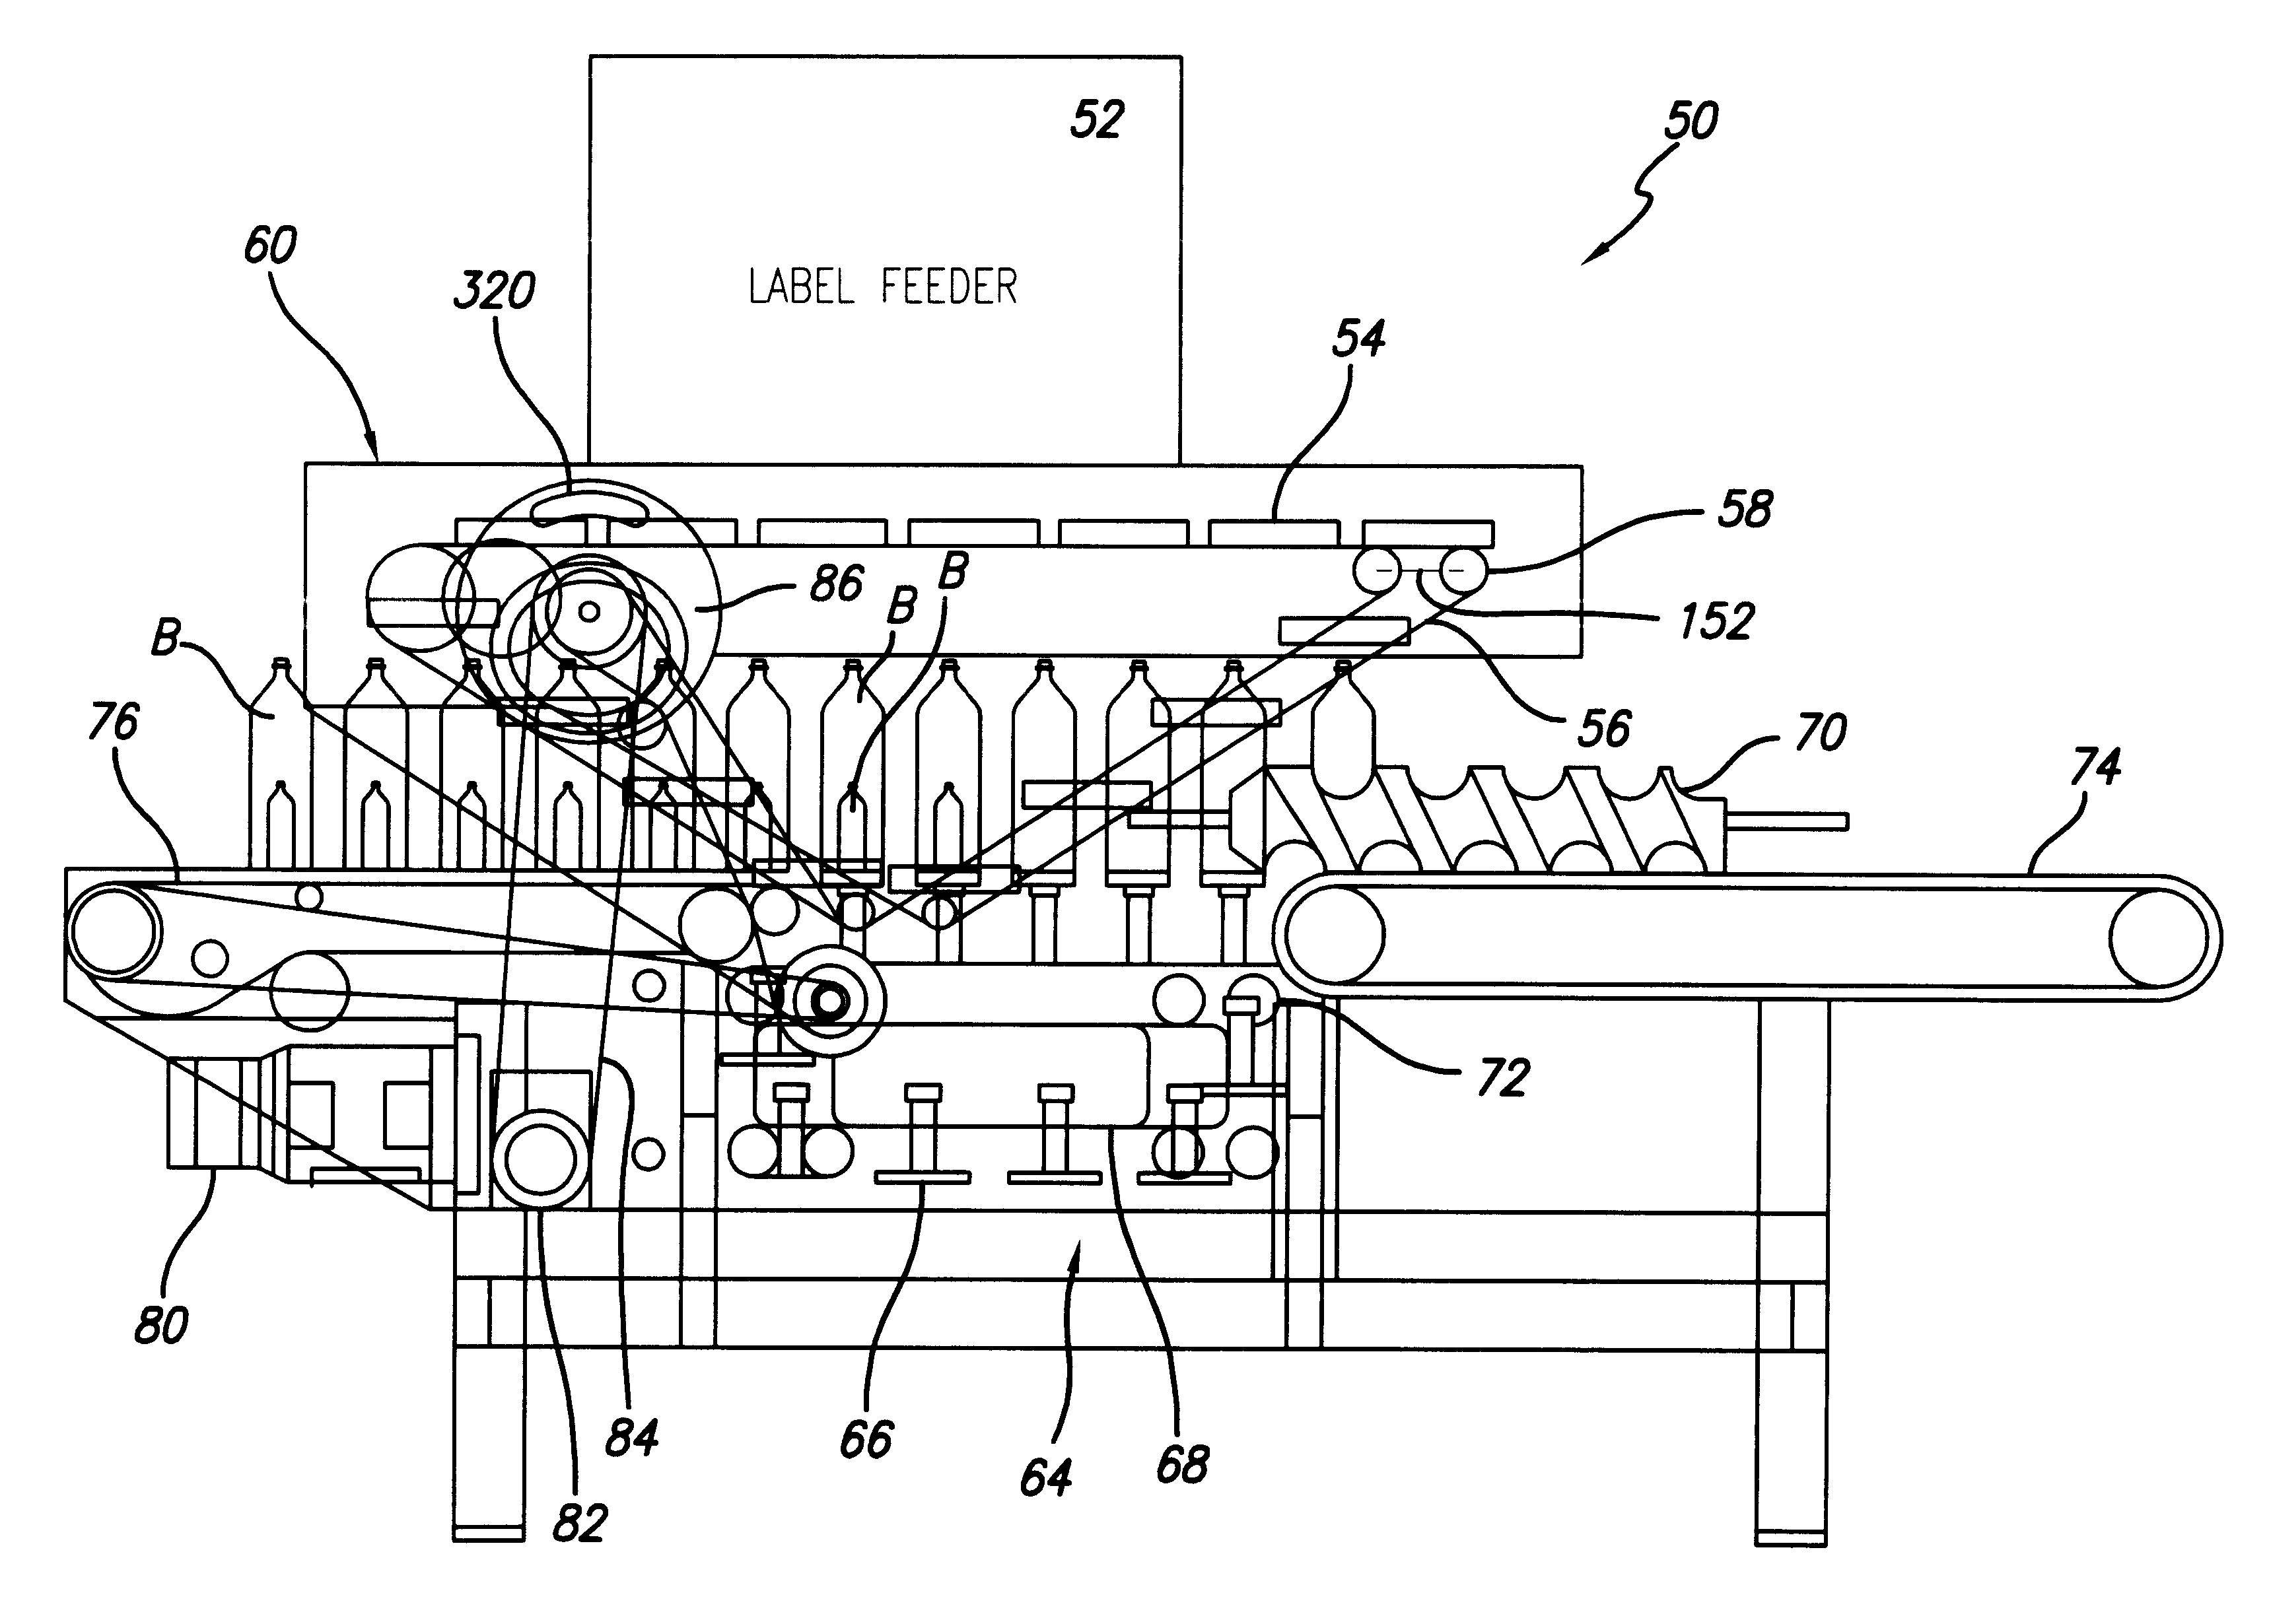 In-line continuous feed sleeve labeling machine and method